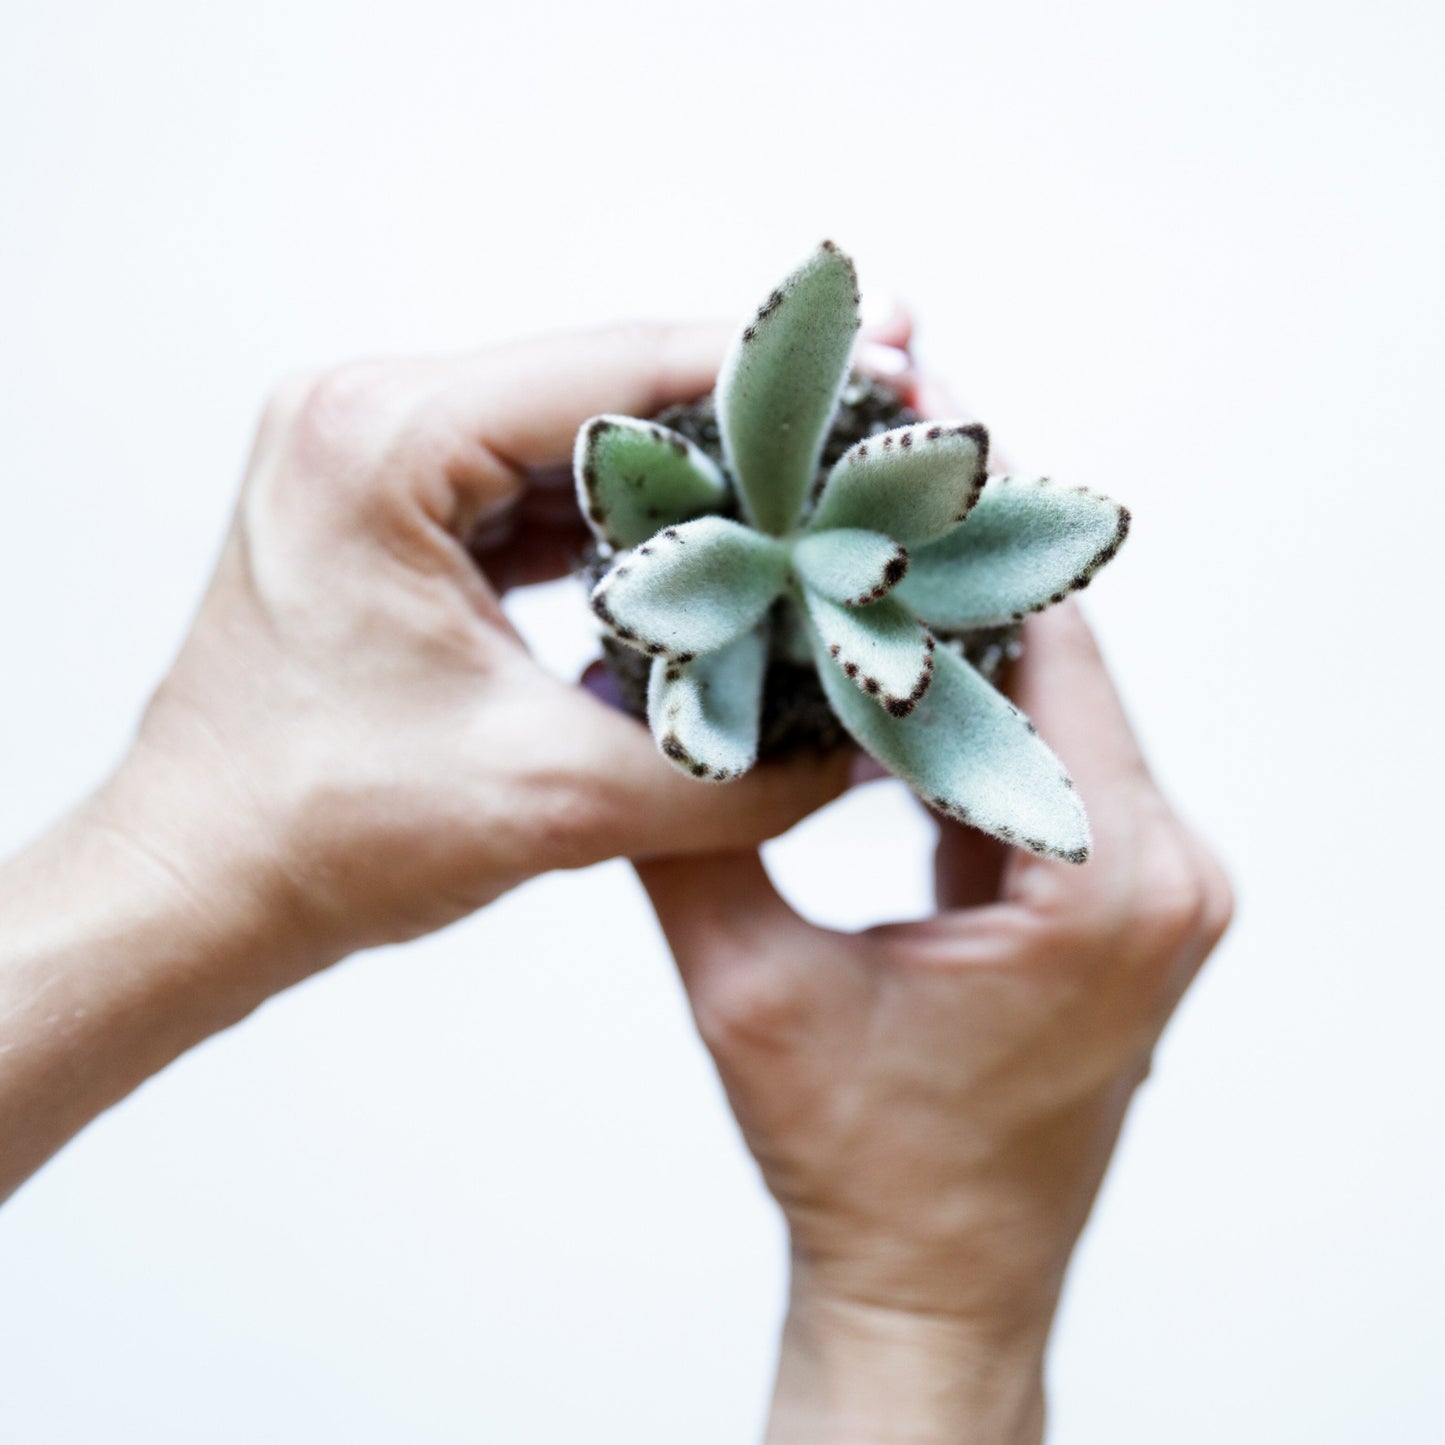 On a white background is a model holding up a Panda Kalanchoe Tomentosa Succulent.